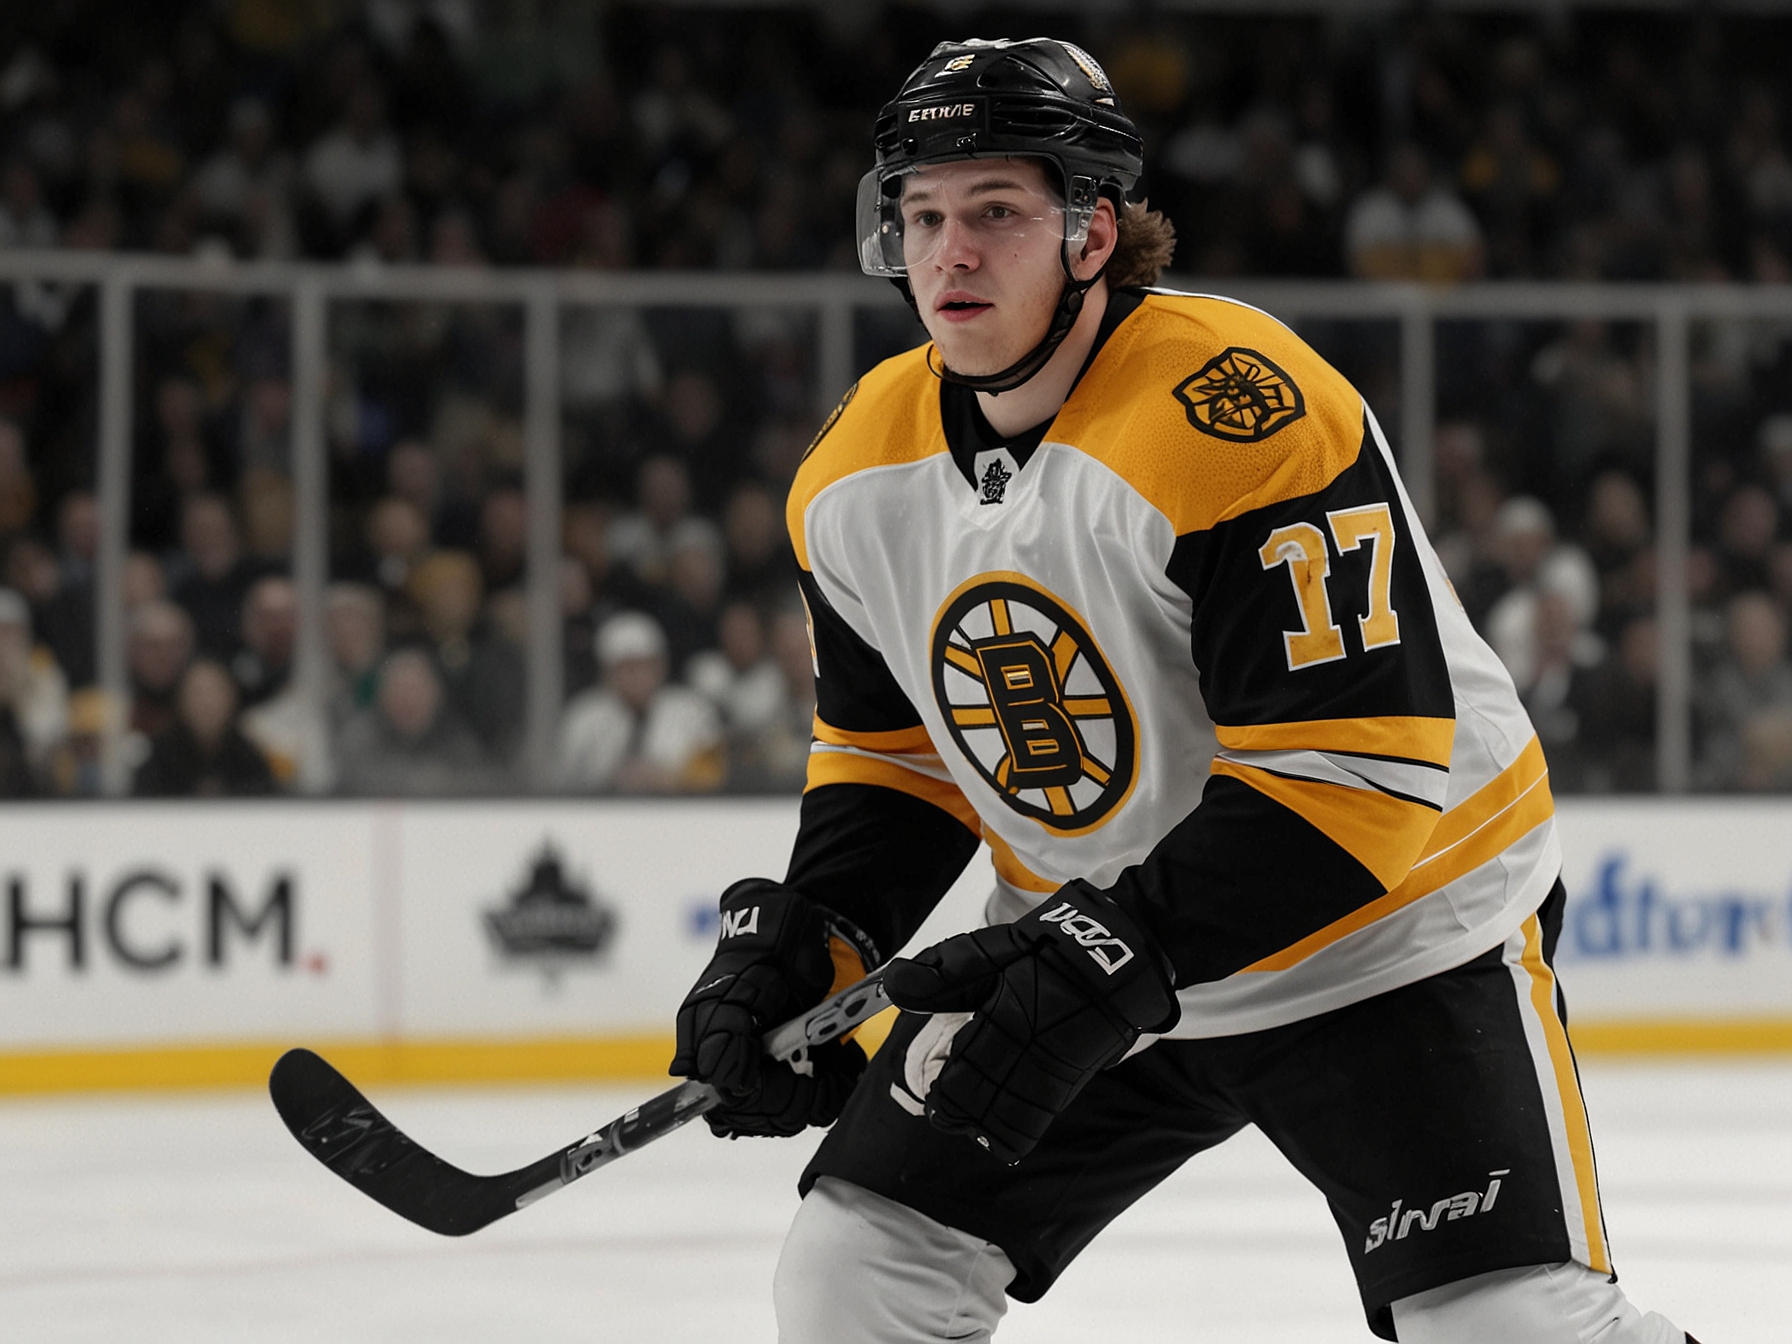 Torey Krug during a Boston Bruins game, showcasing his skills on the ice - an integral part of the team before his departure.